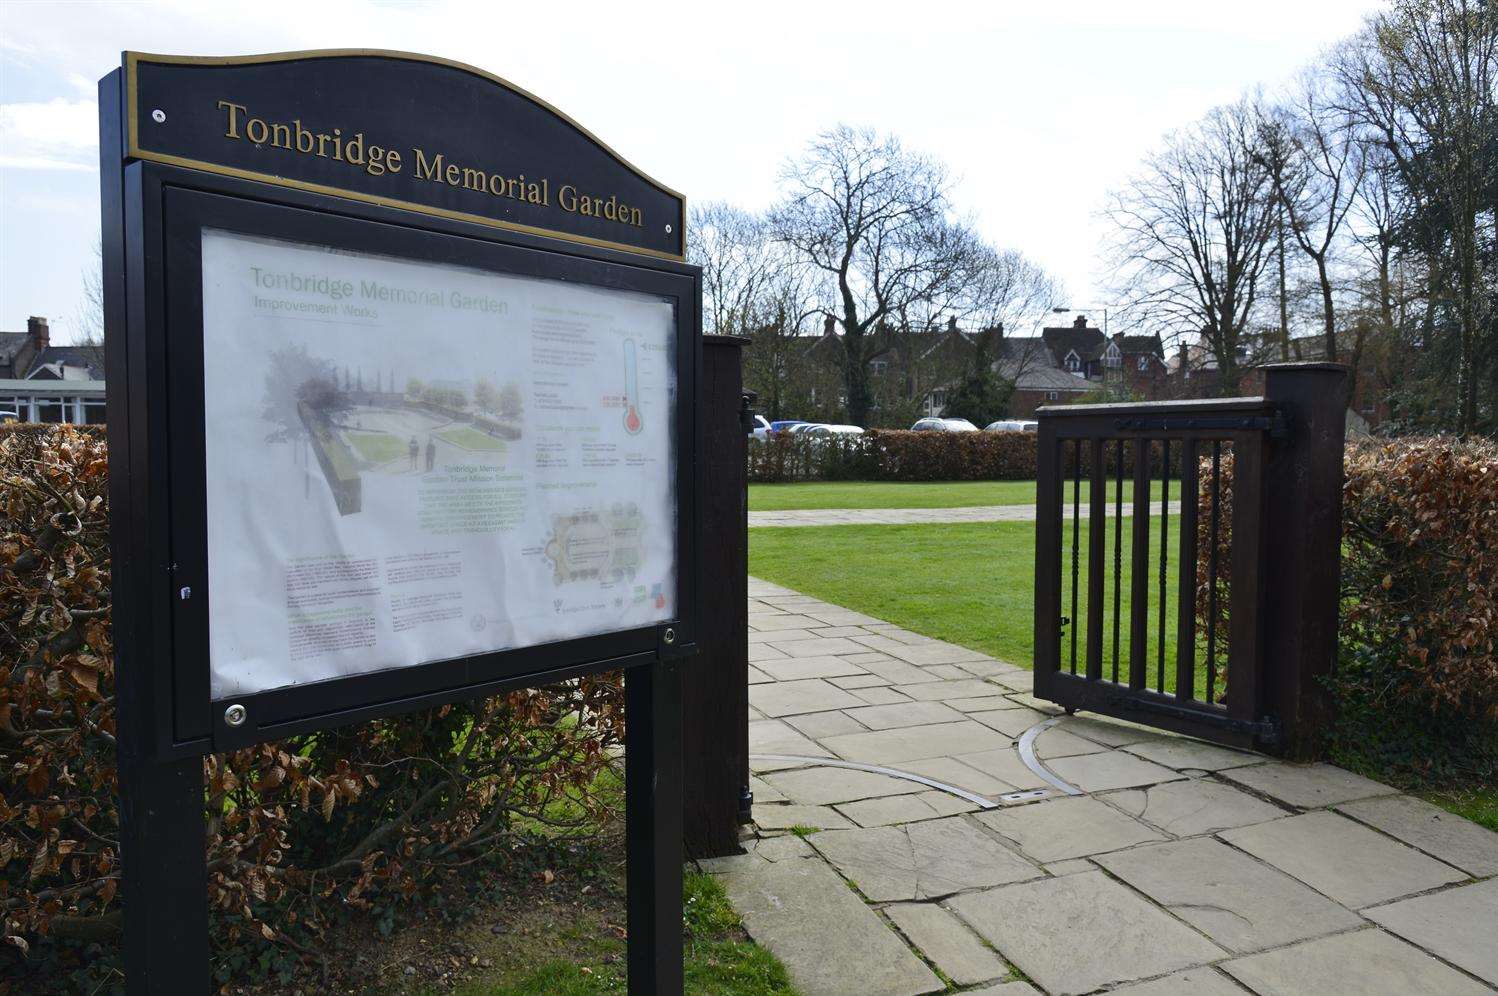 The Tonbridge Memorial Gardens have been refurbished and an opening ceremony was held today